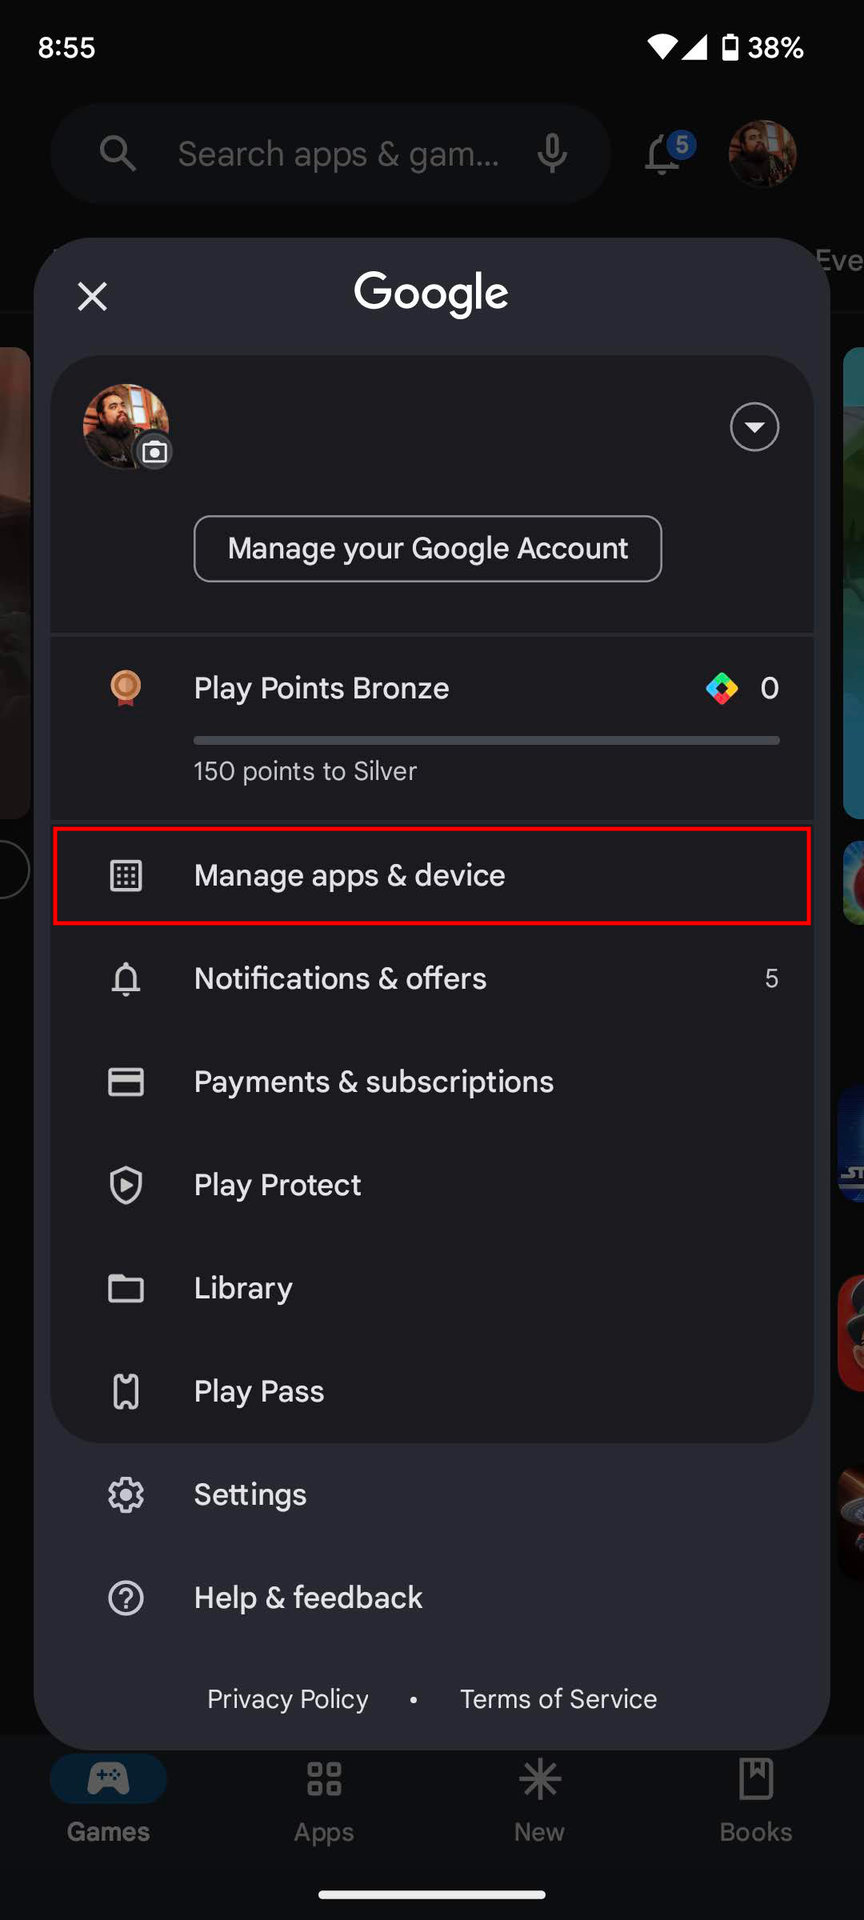 How to find the apps you've downloaded from the Google Play Store (2)